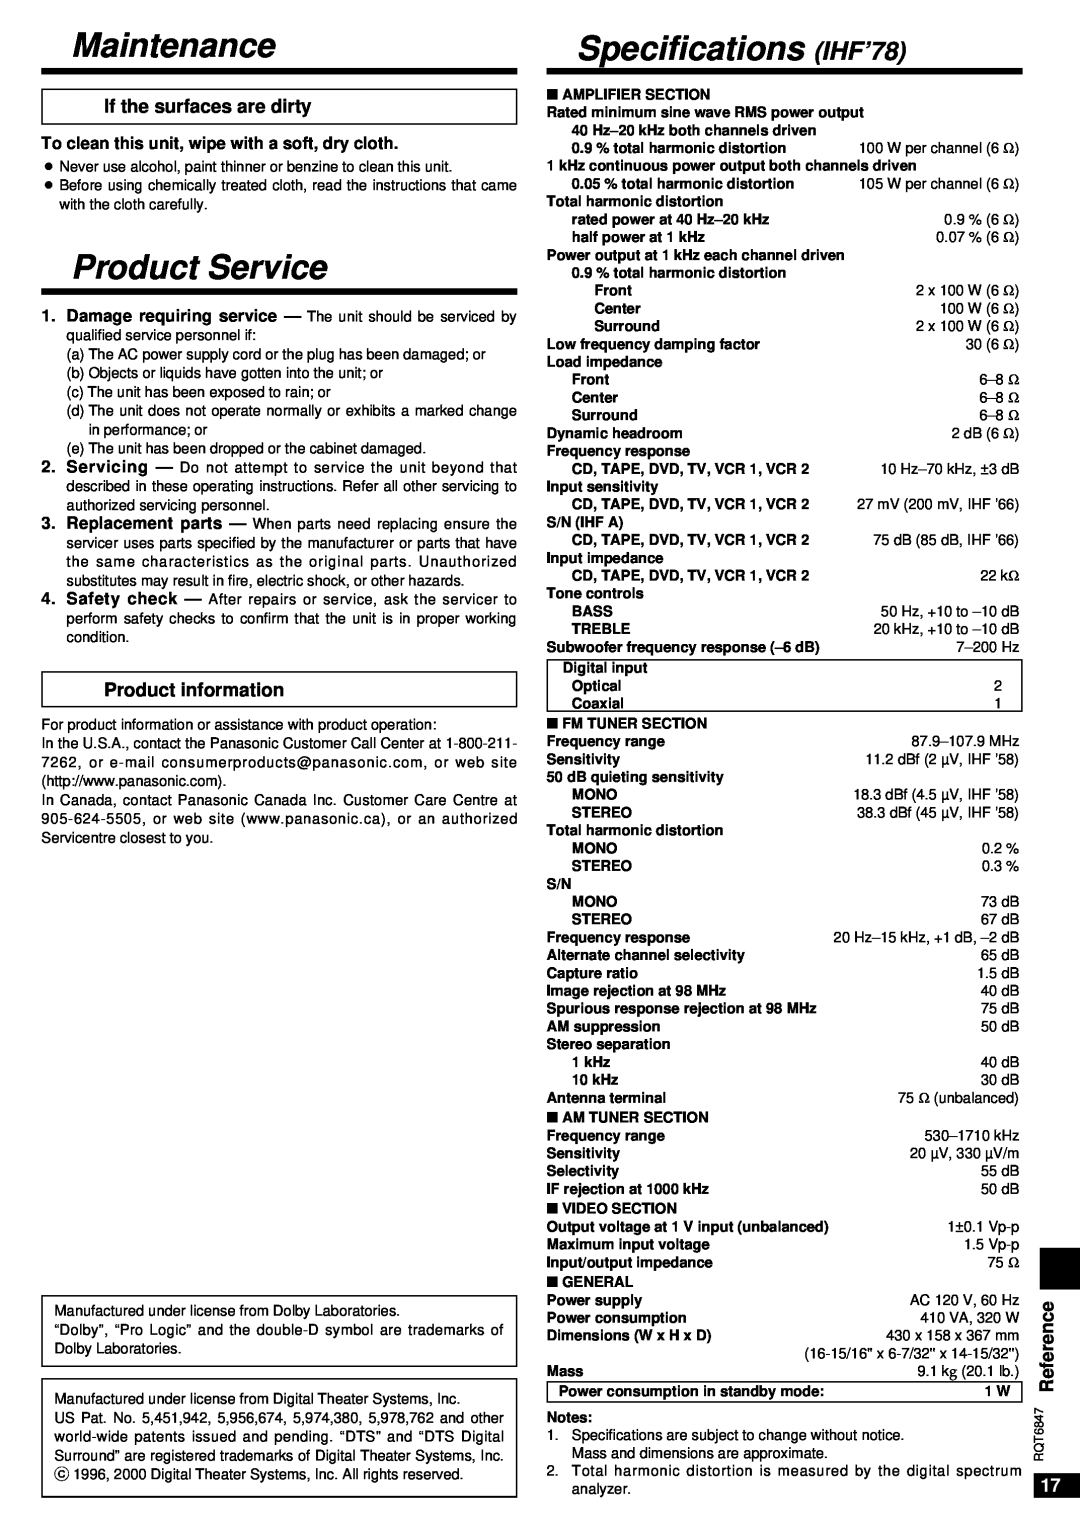 Panasonic SA-HE75 Maintenance, Product Service, Specifications IHF’78, If the surfaces are dirty, Product information 